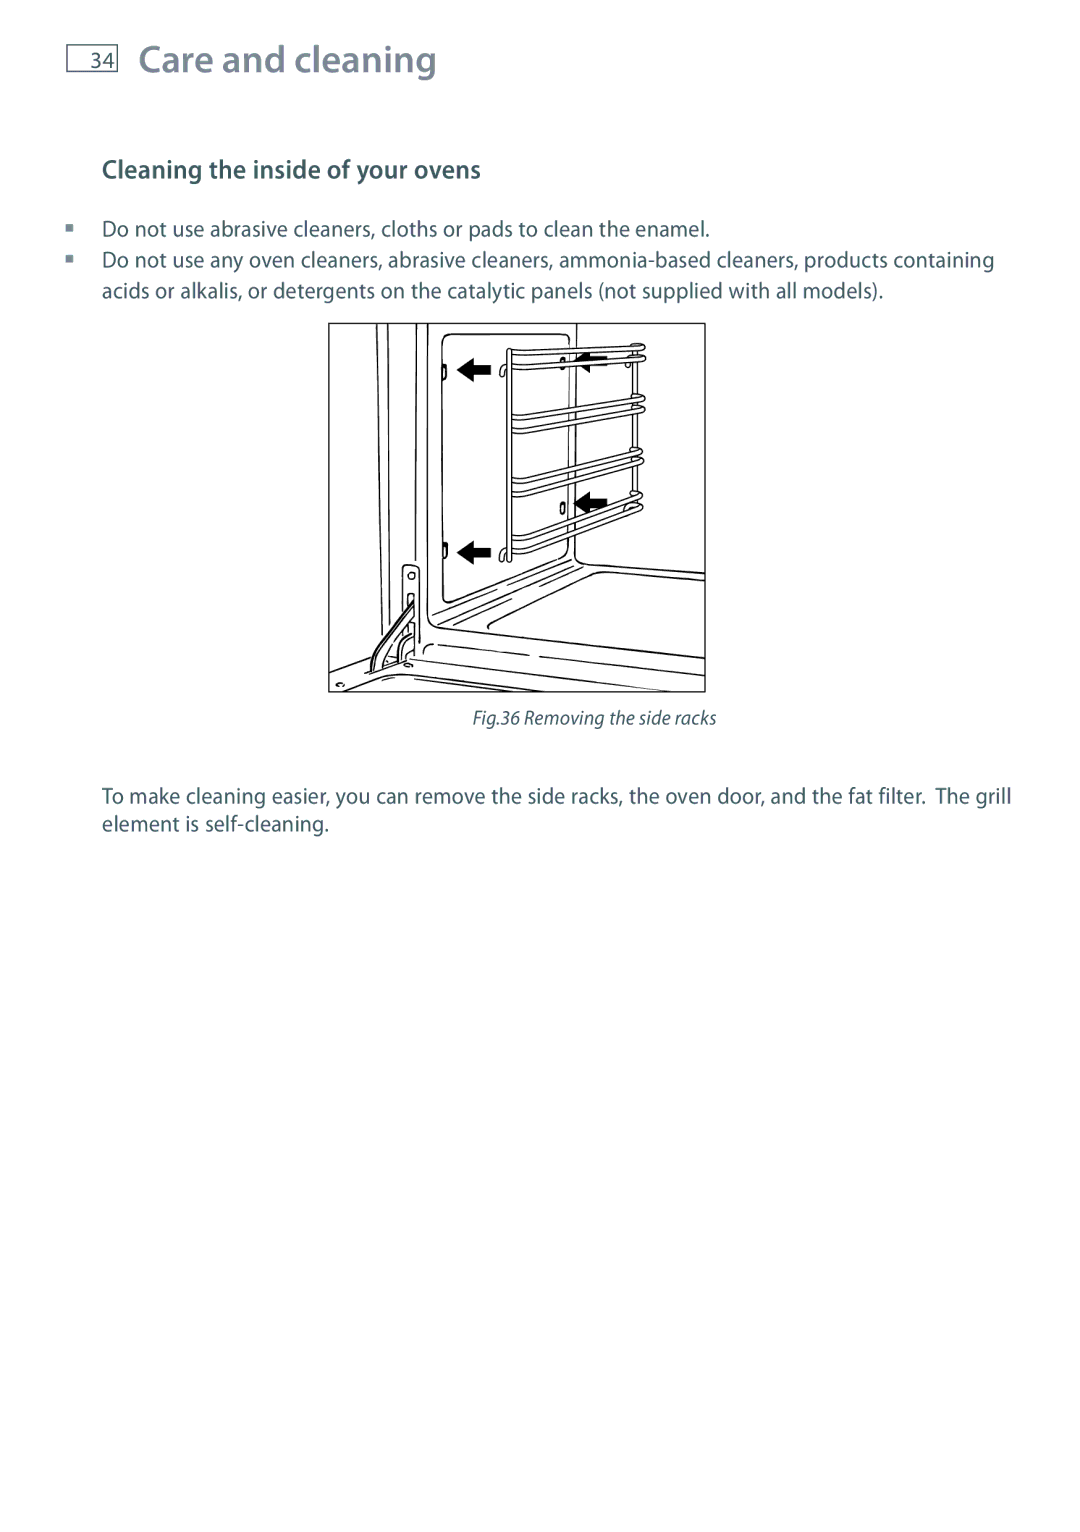 Fisher & Paykel GB IE installation instructions Cleaning the inside of your ovens, Removing the side racks 